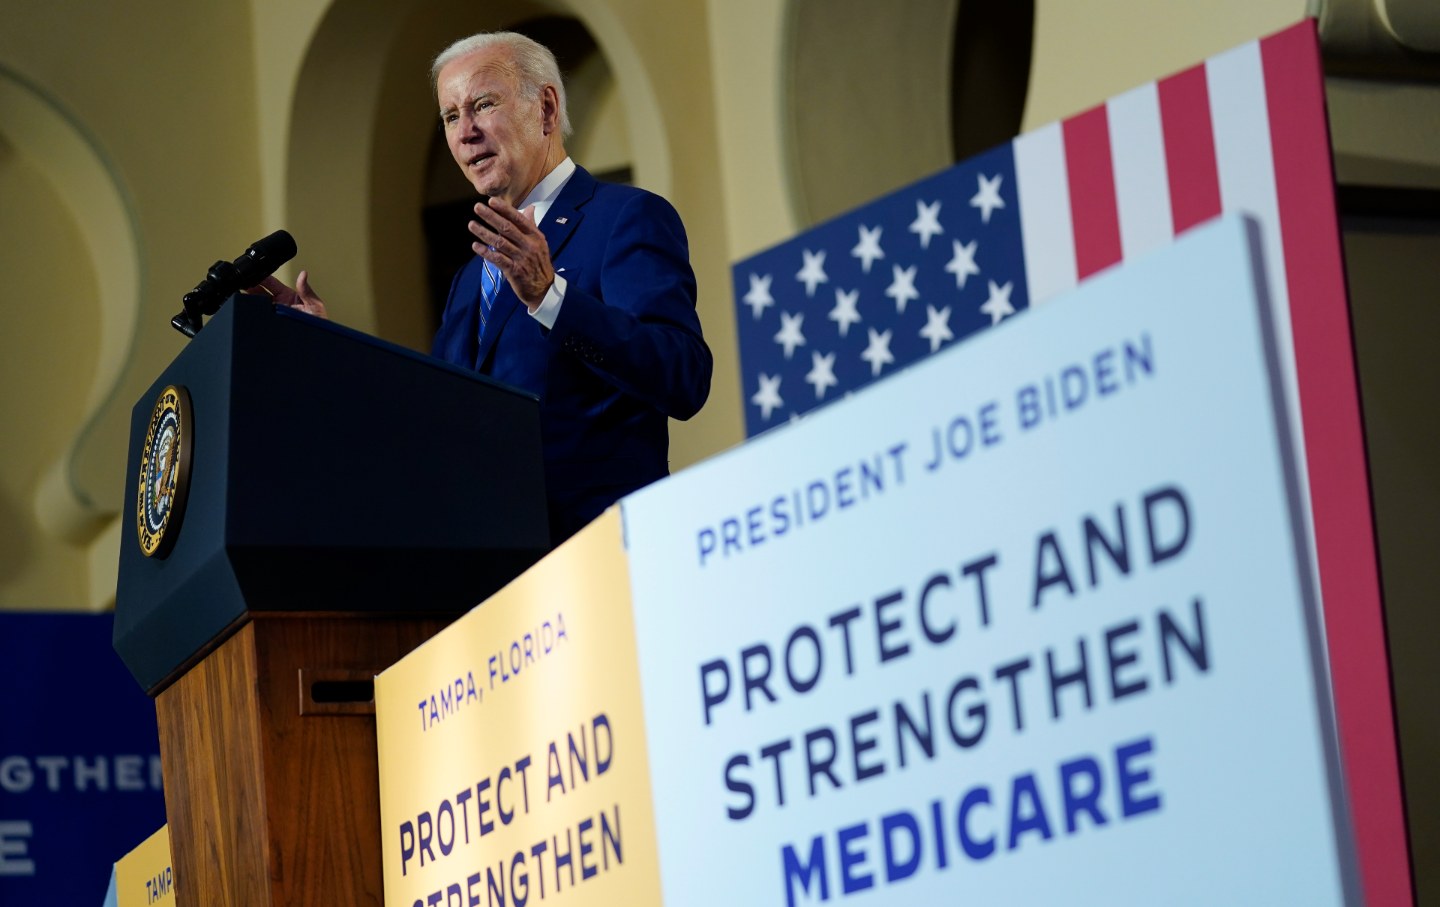 Biden at a dais flanked by signs saying 